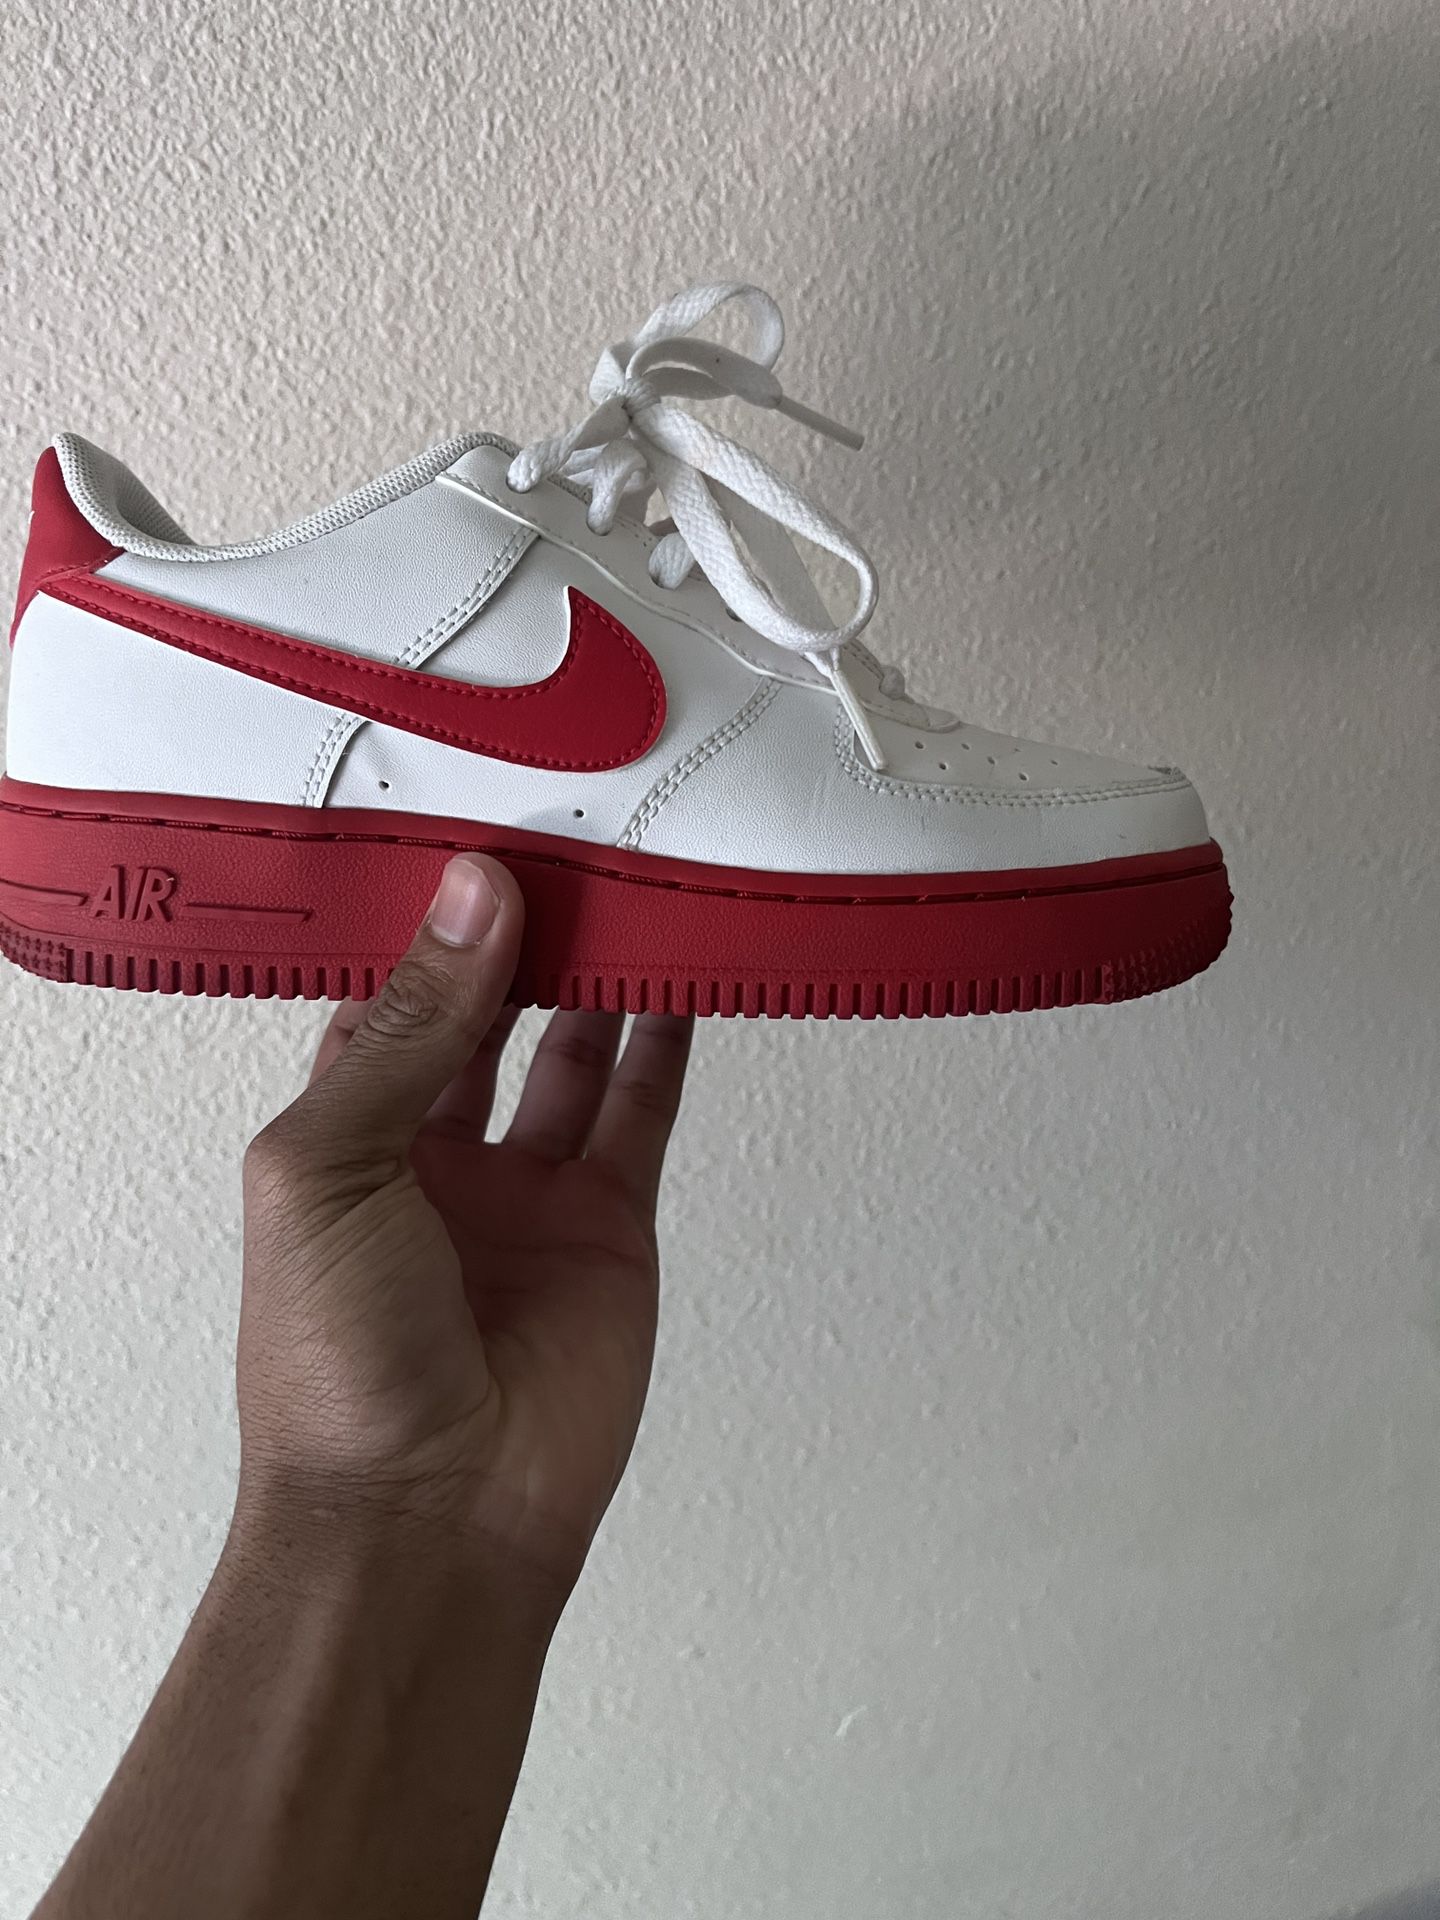 nike air force 1 low white red 4.5 youth